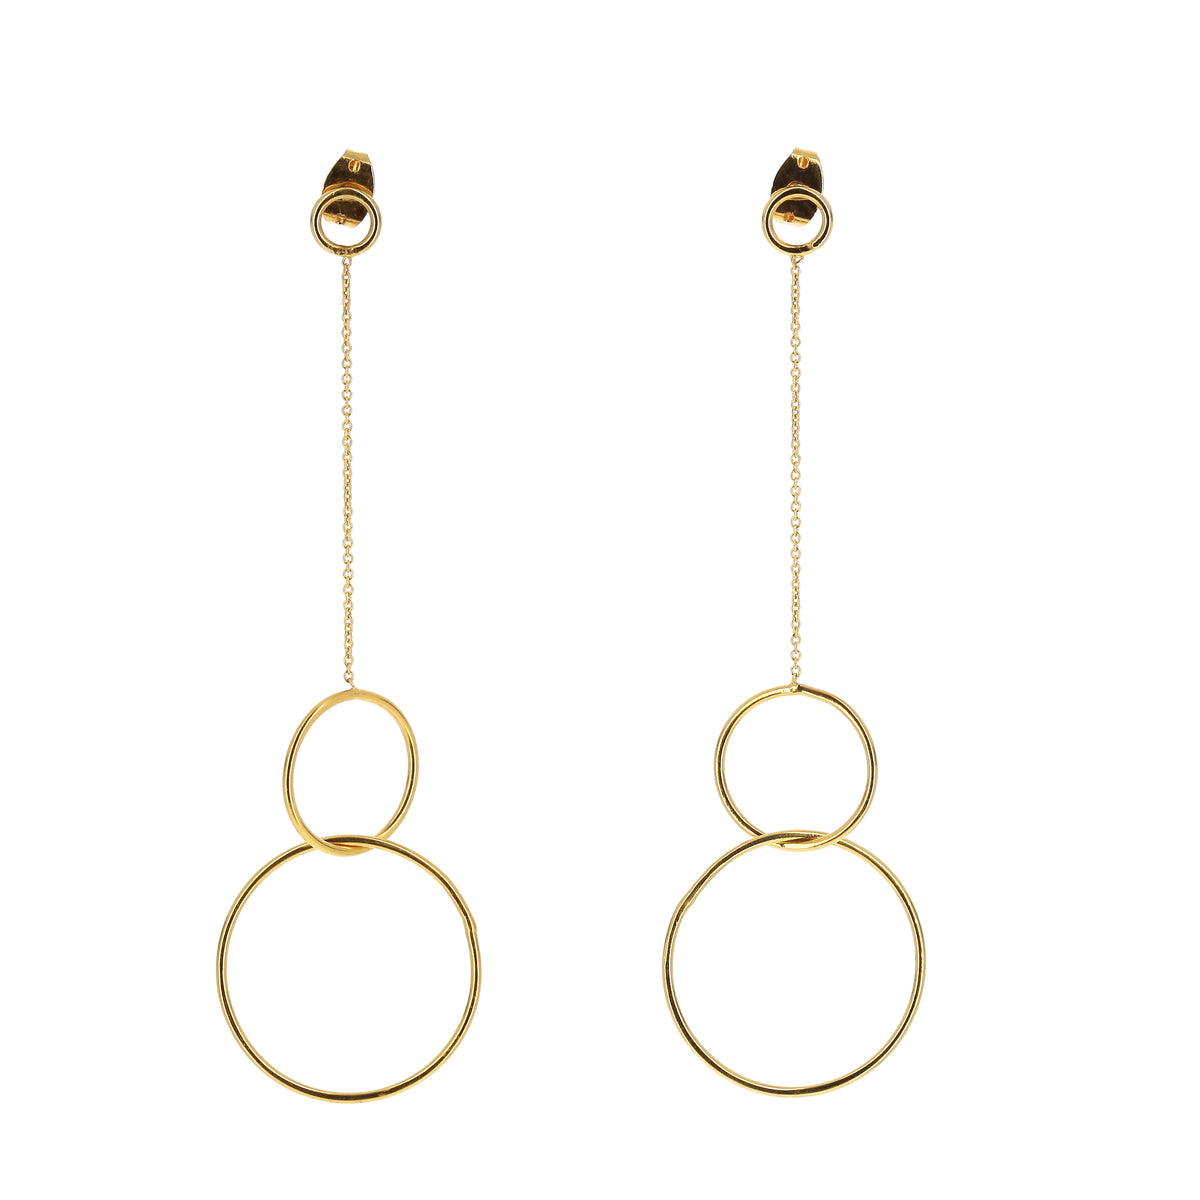 The gold plated silver Trinity earrings consist of a gold plated silver chain and two intertwining circles.